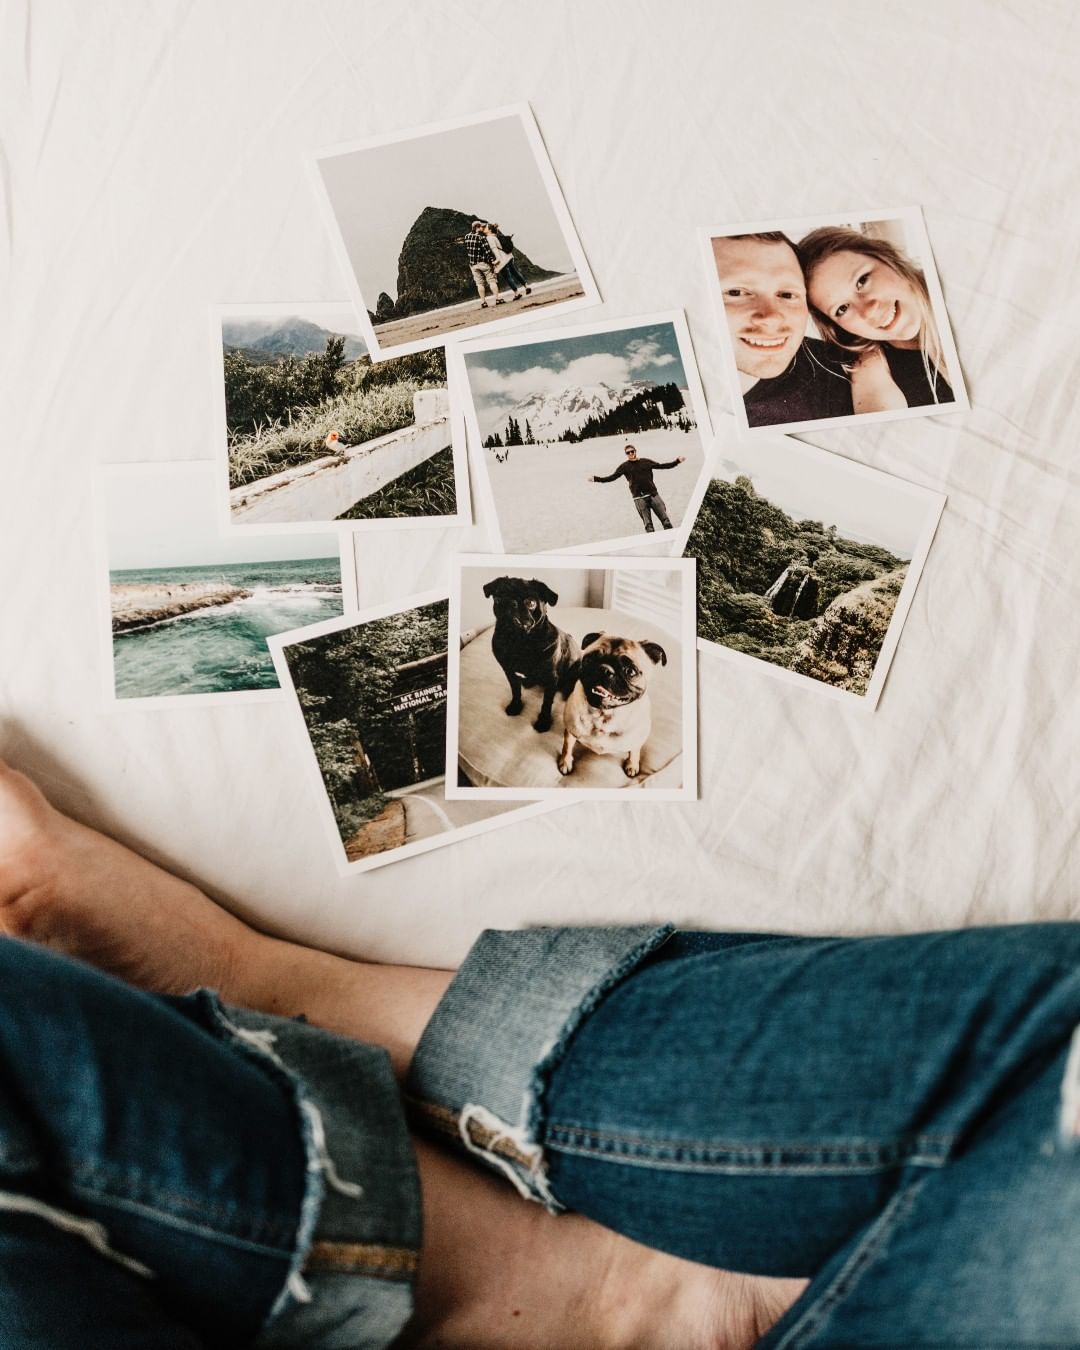 Pictures scattered on a bed. Photo by Instagram user @surround_us